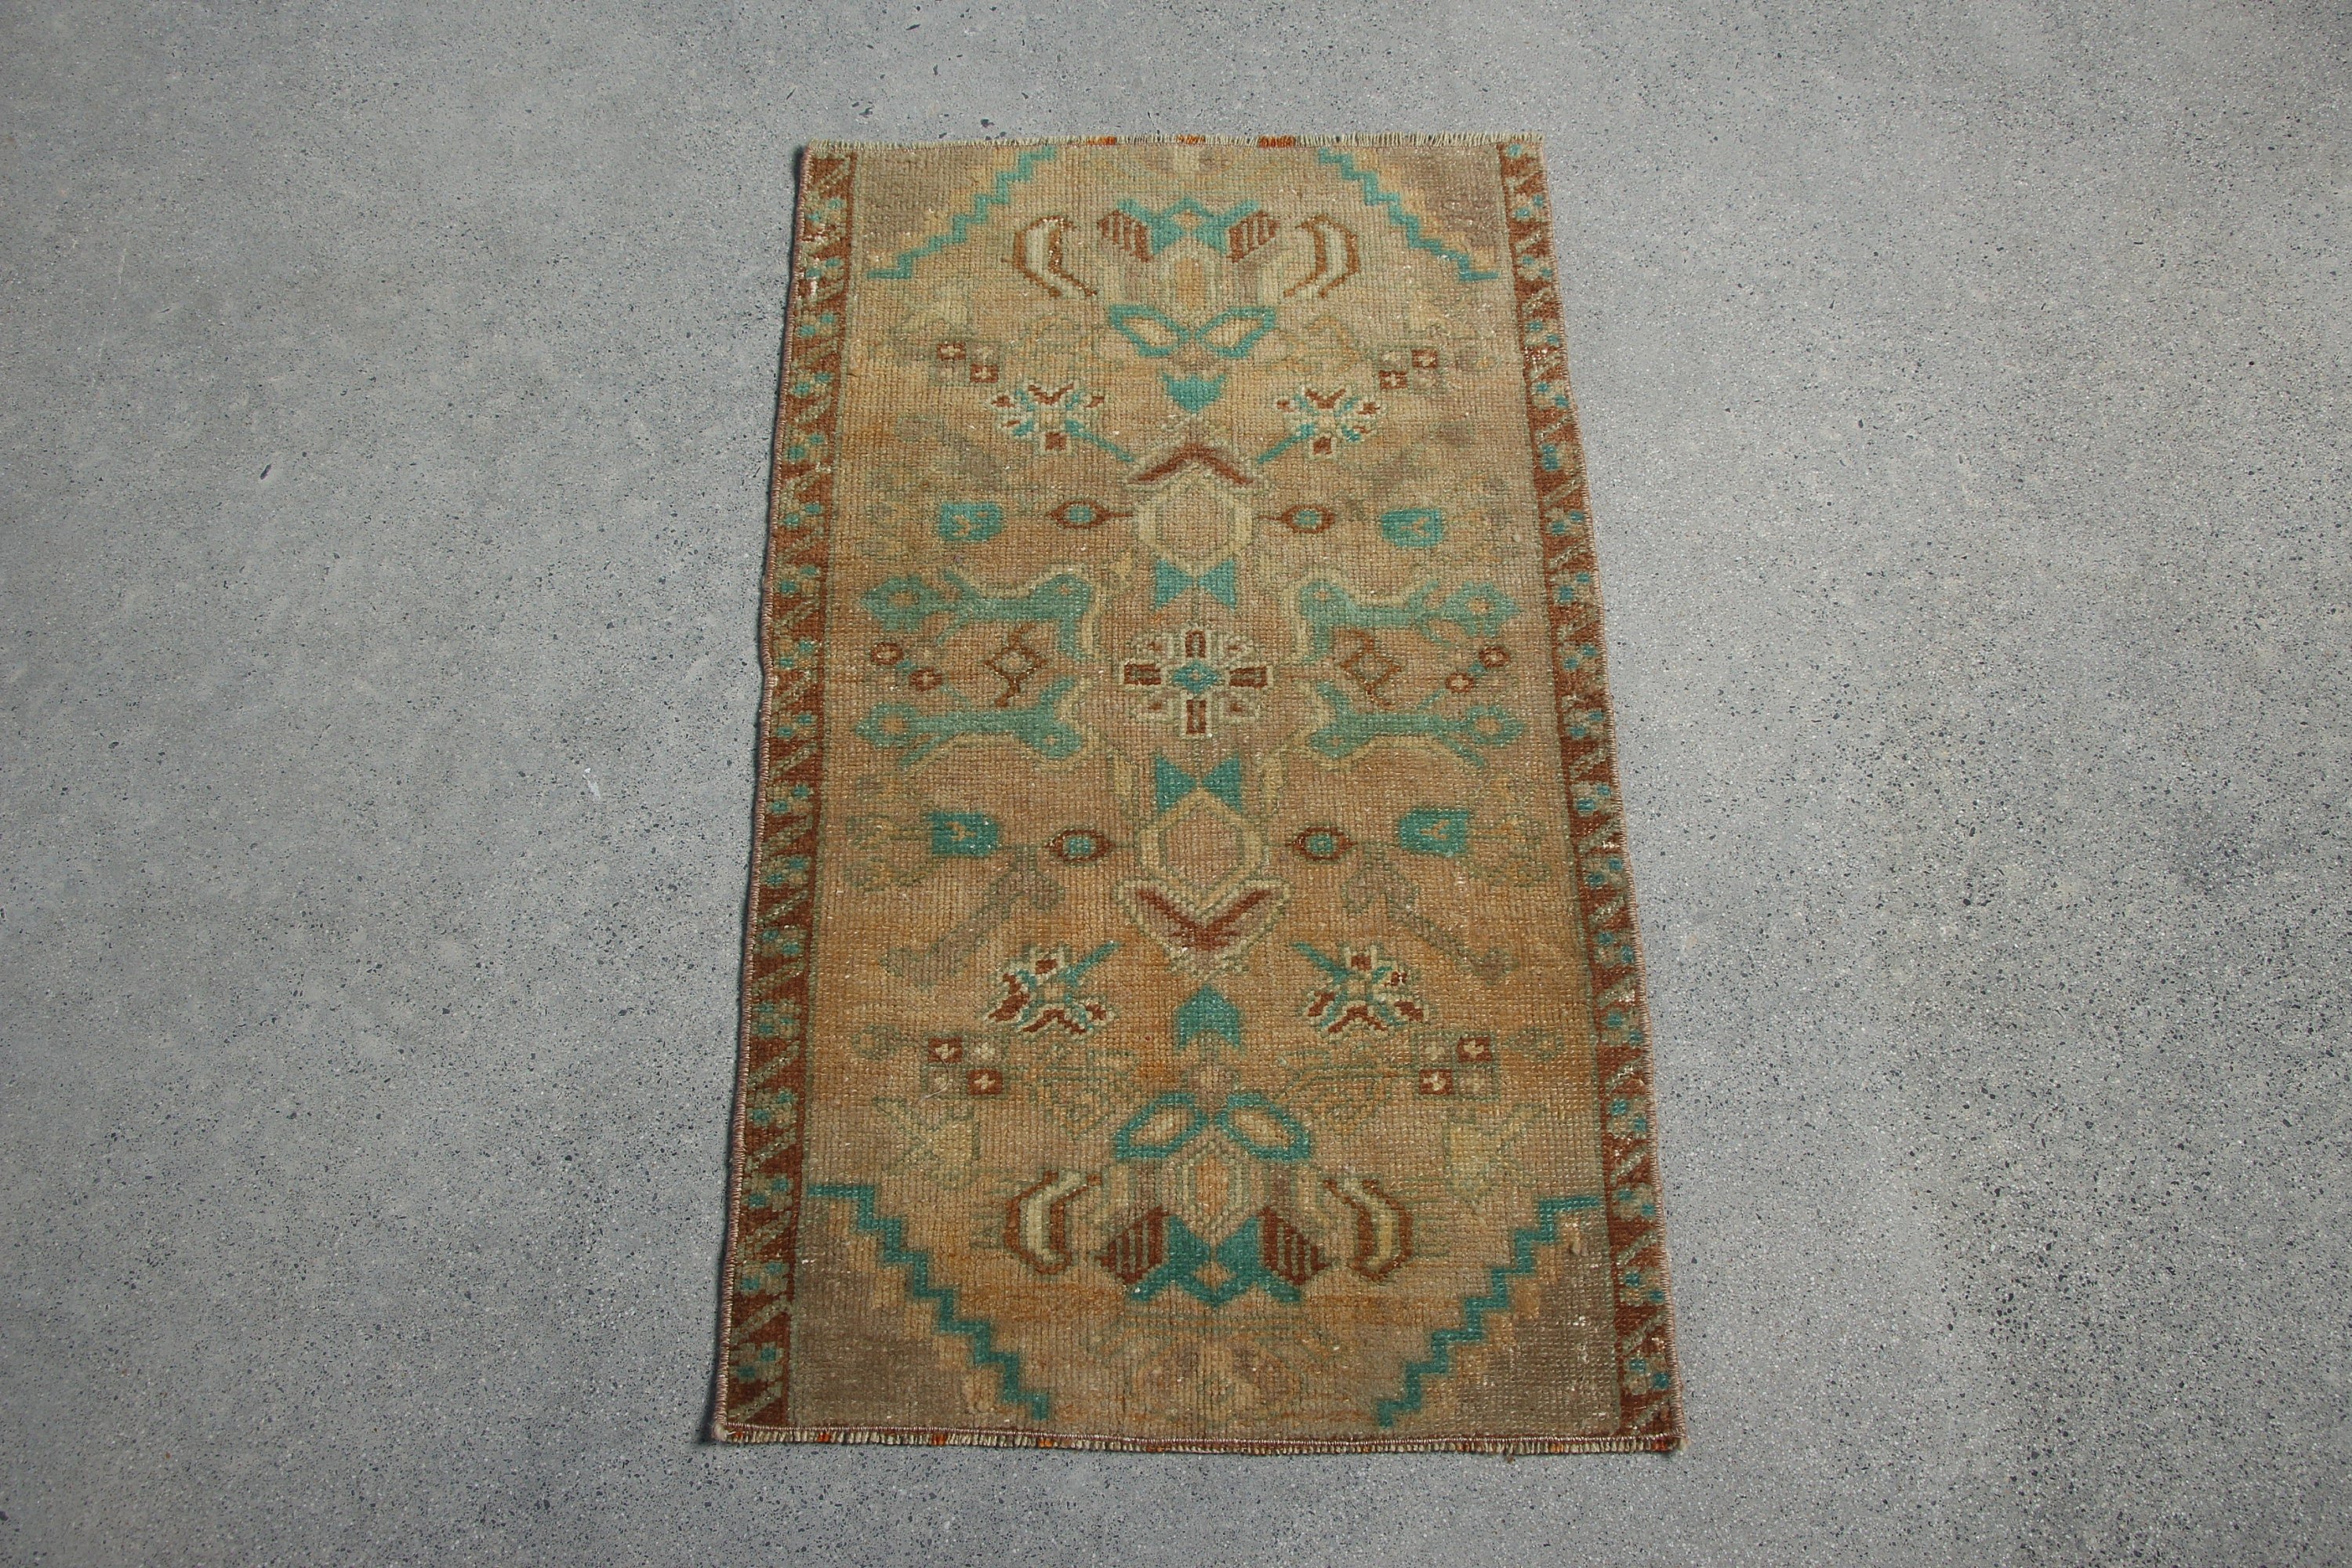 Vintage Rugs, 1.6x2.8 ft Small Rug, Moroccan Rugs, Entry Rugs, Brown Home Decor Rug, Anatolian Rug, Car Mat Rug, Outdoor Rugs, Turkish Rugs